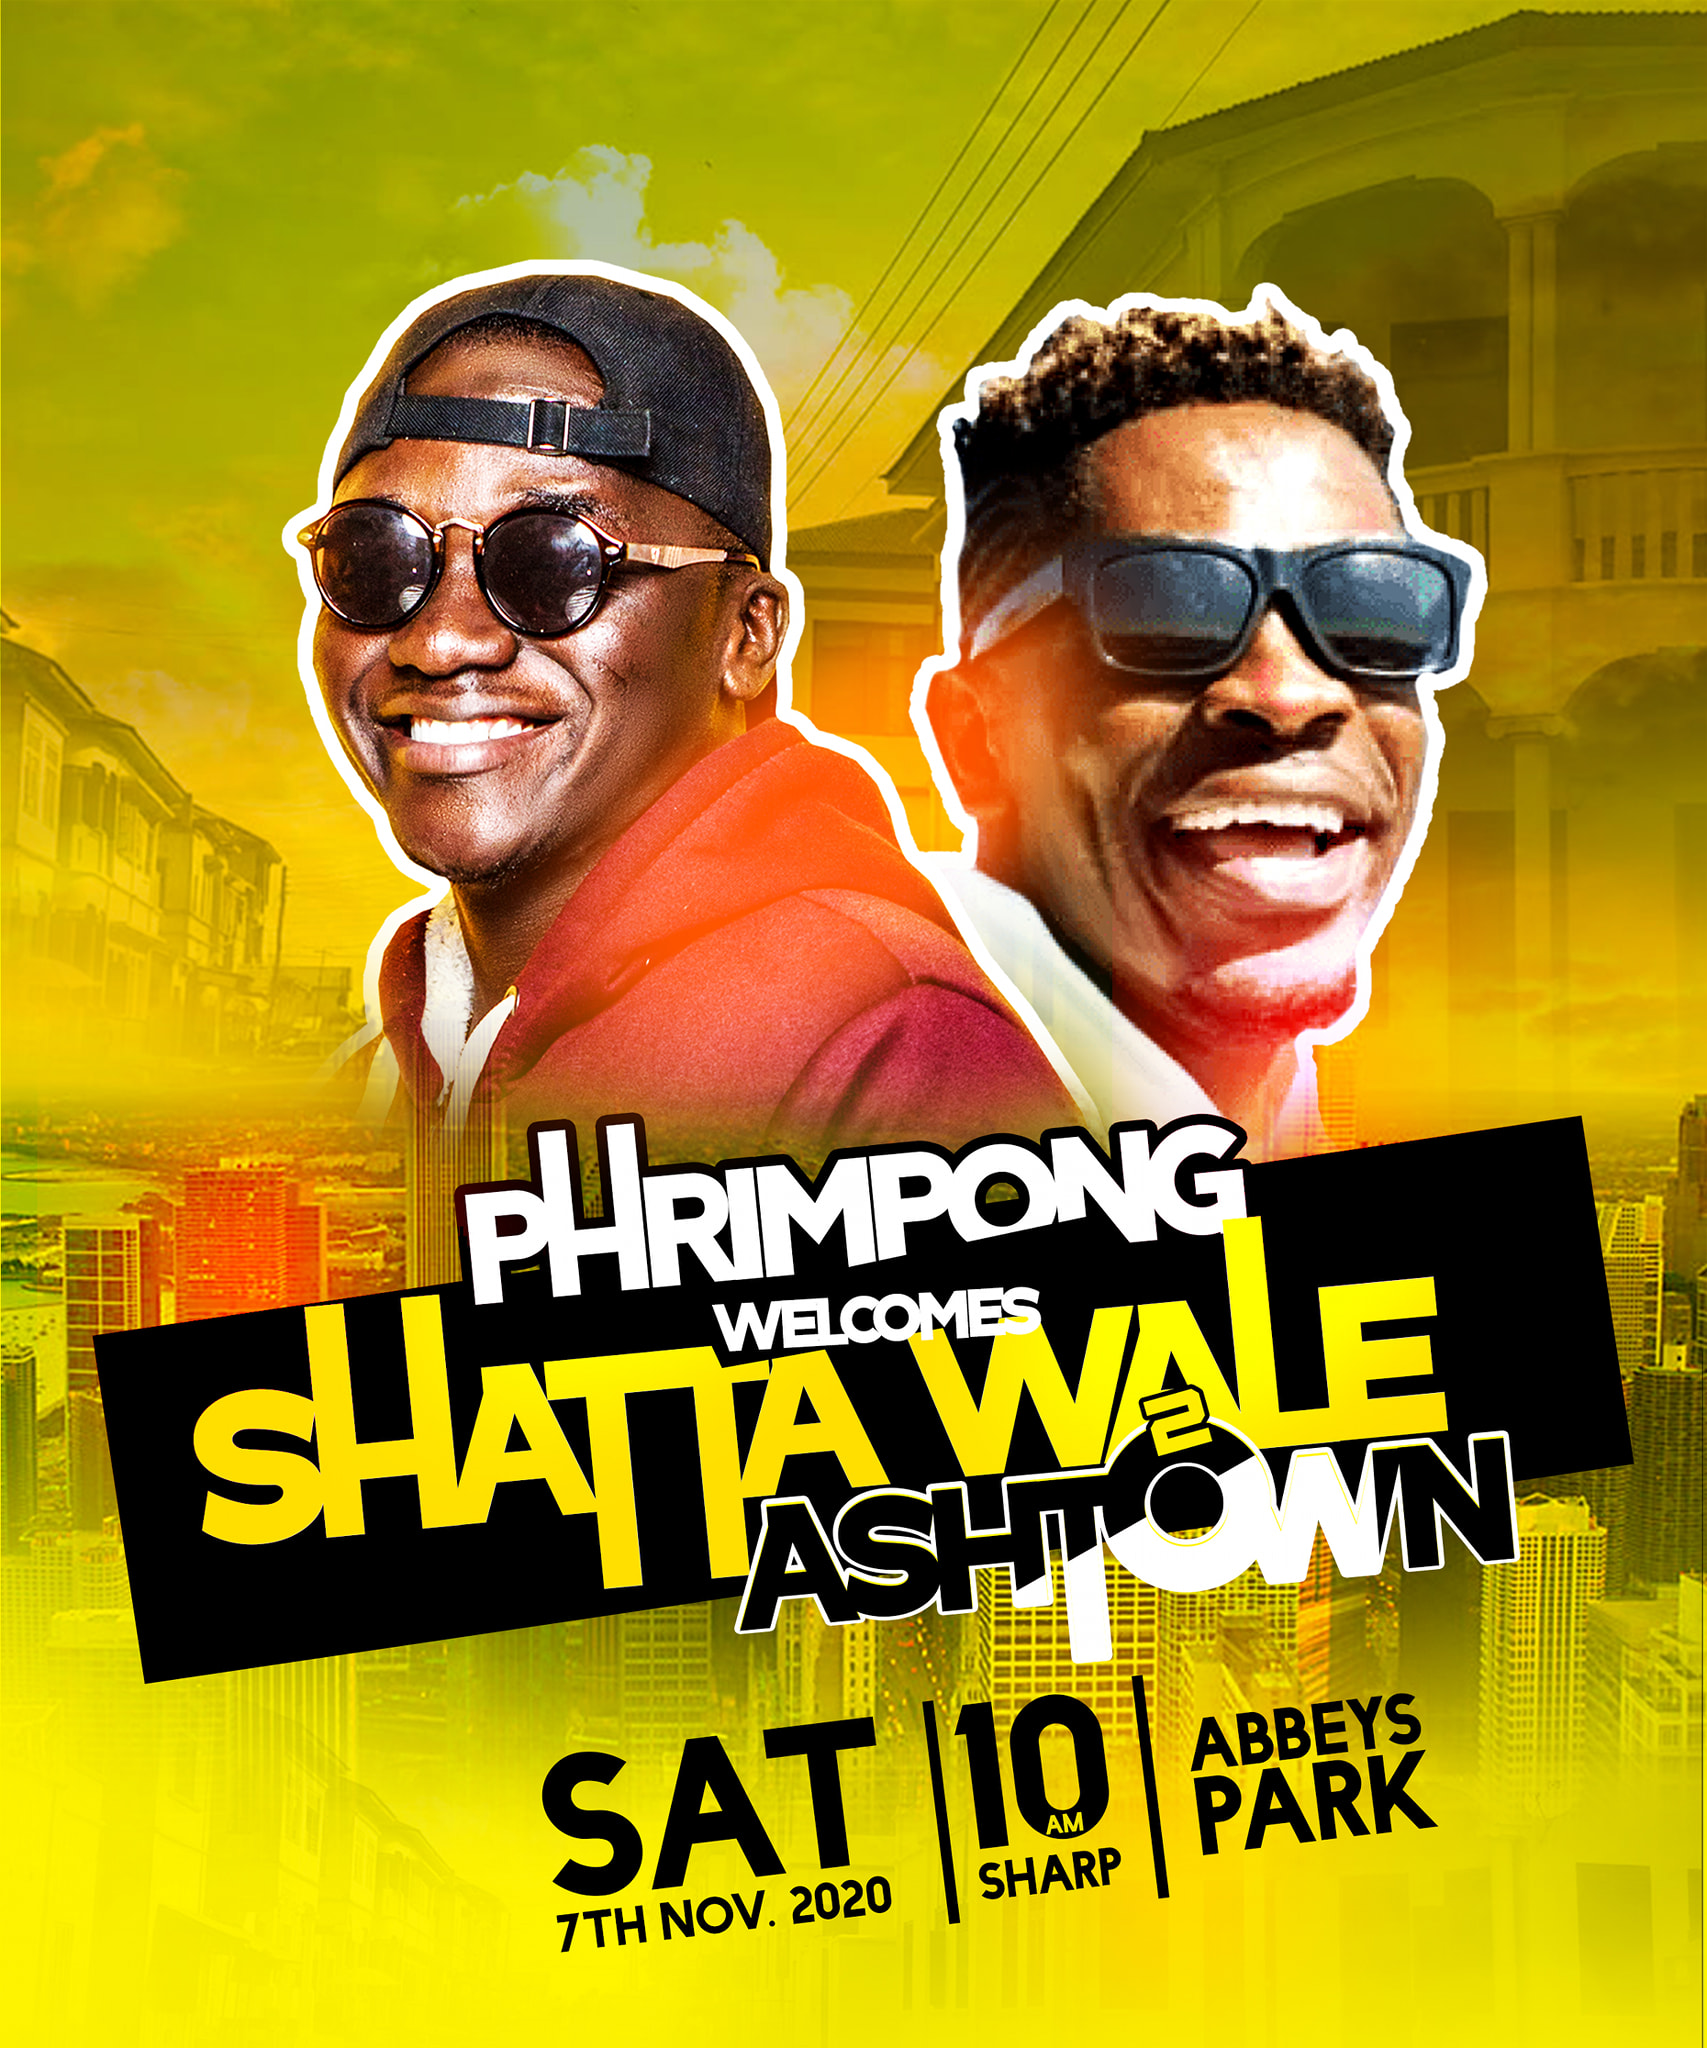 Shatta Wale Ft. Phrimpong